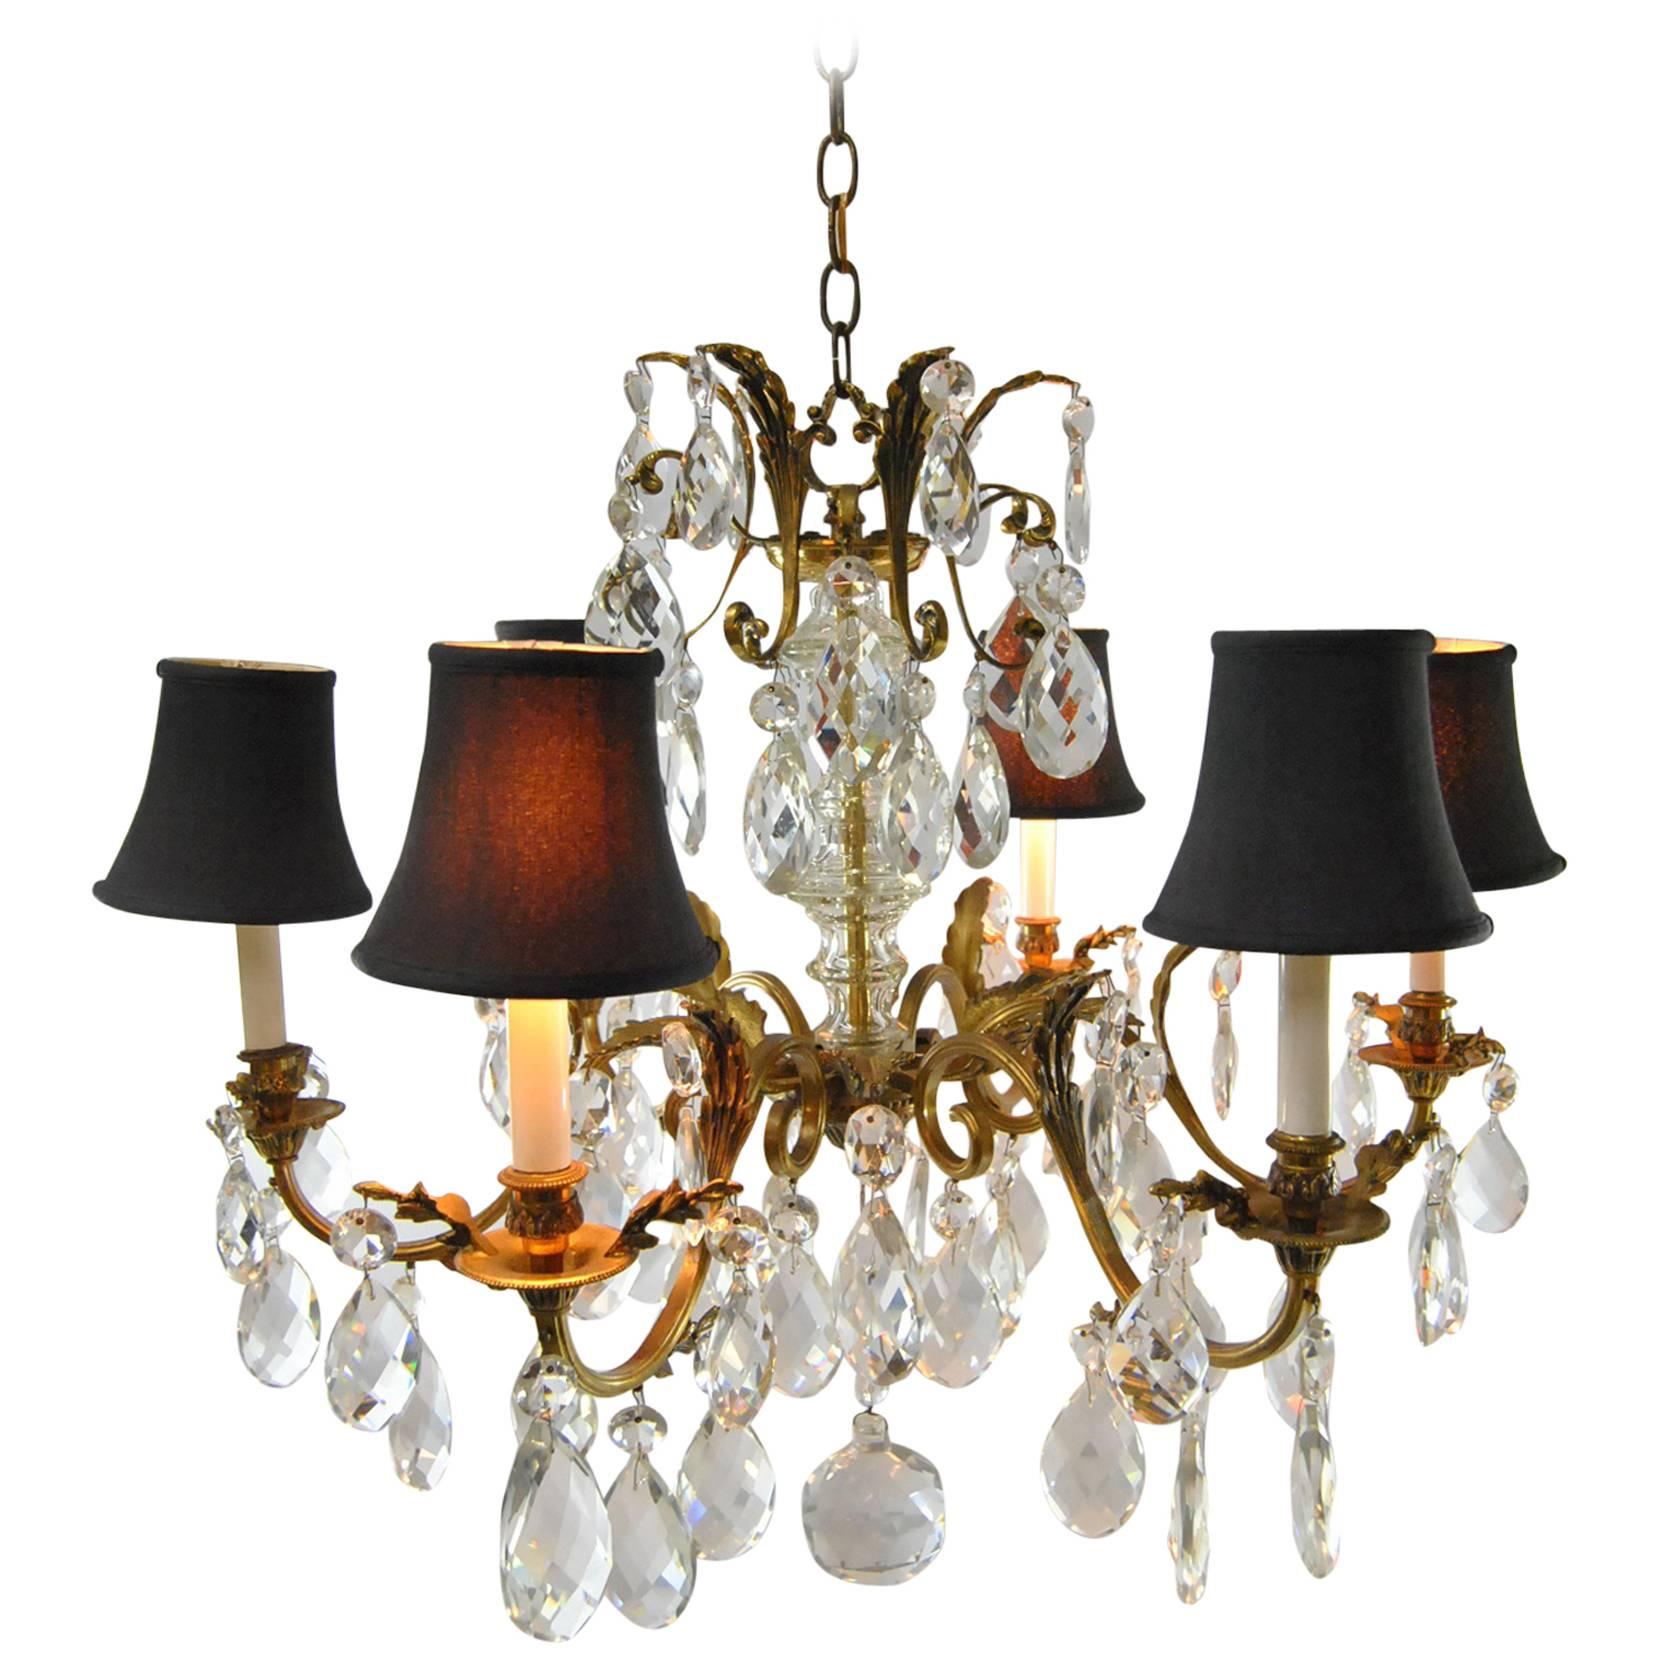 French Bronze Crystal Chandelier with Six Arms